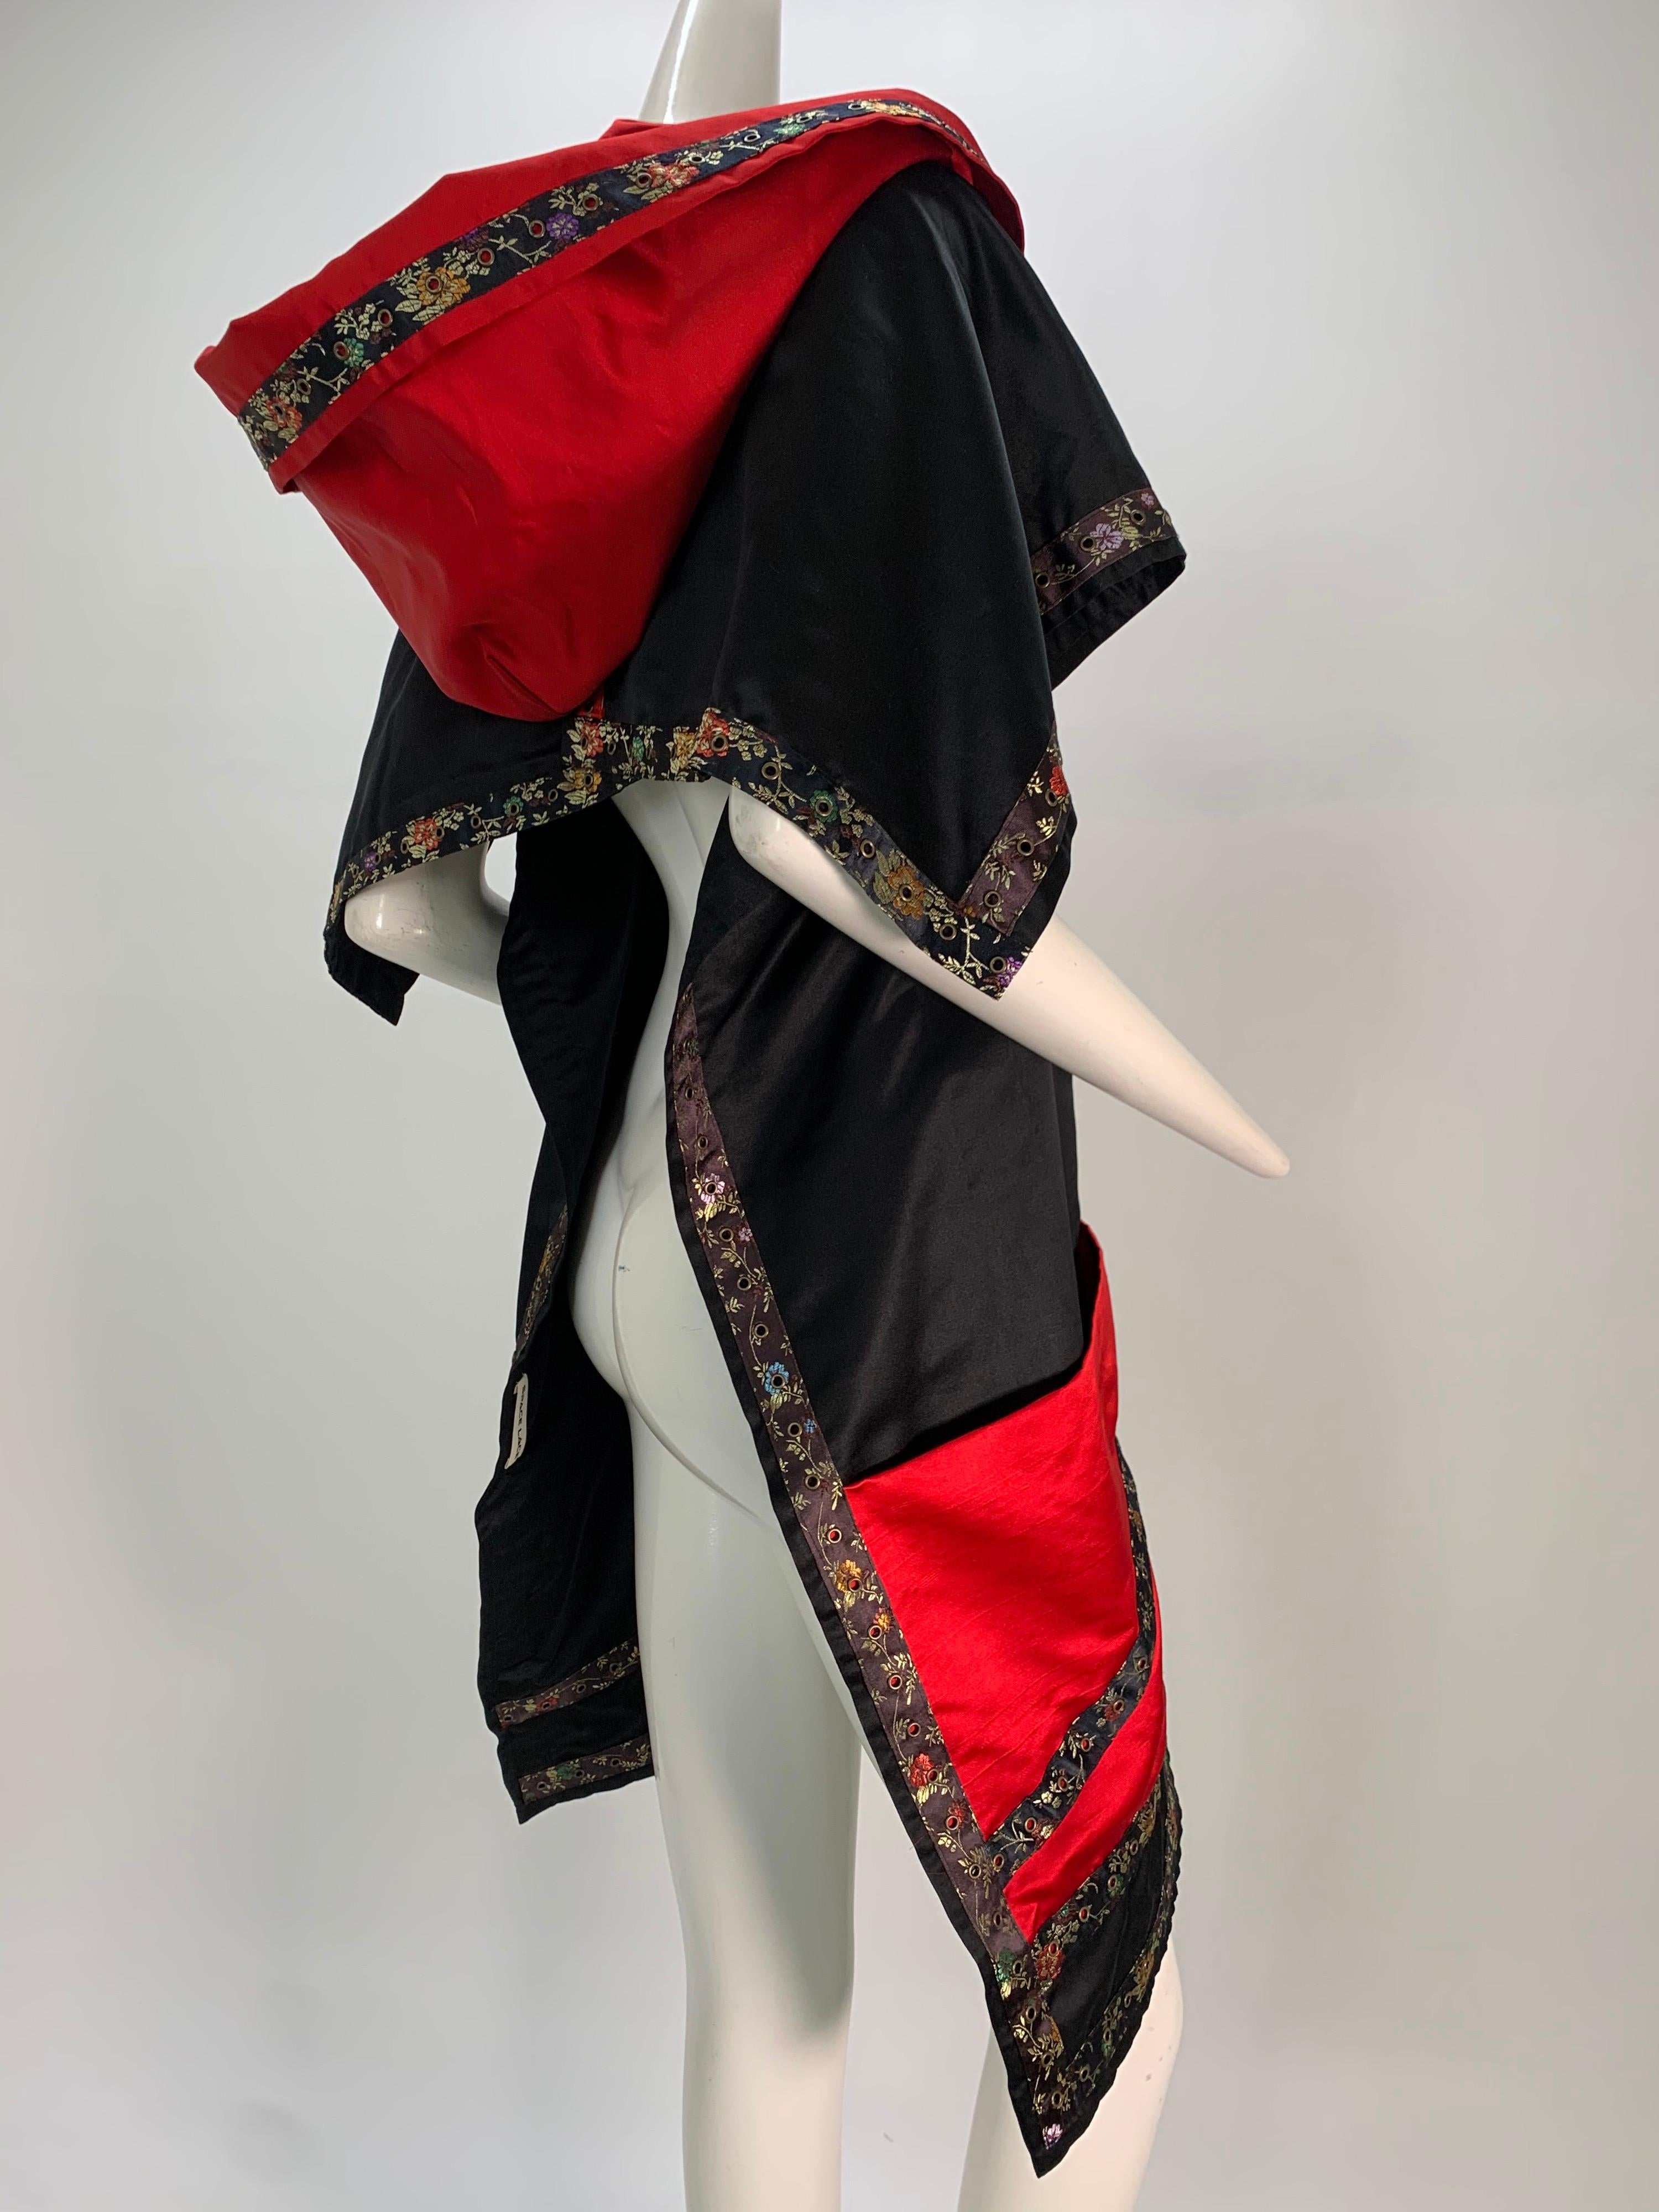 Torso Creations Black & Red Silk Satin Hooded Wrap Stole Trimmed In Brocade Tape In Excellent Condition For Sale In Gresham, OR